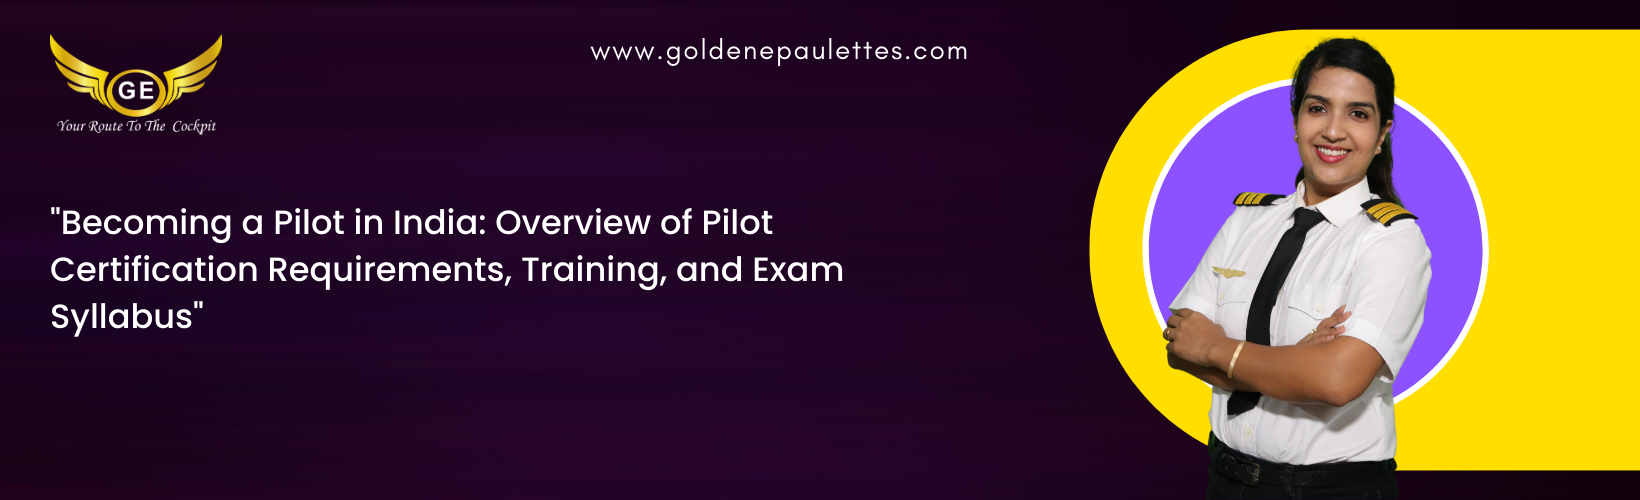 Overview of Pilot Certification in India